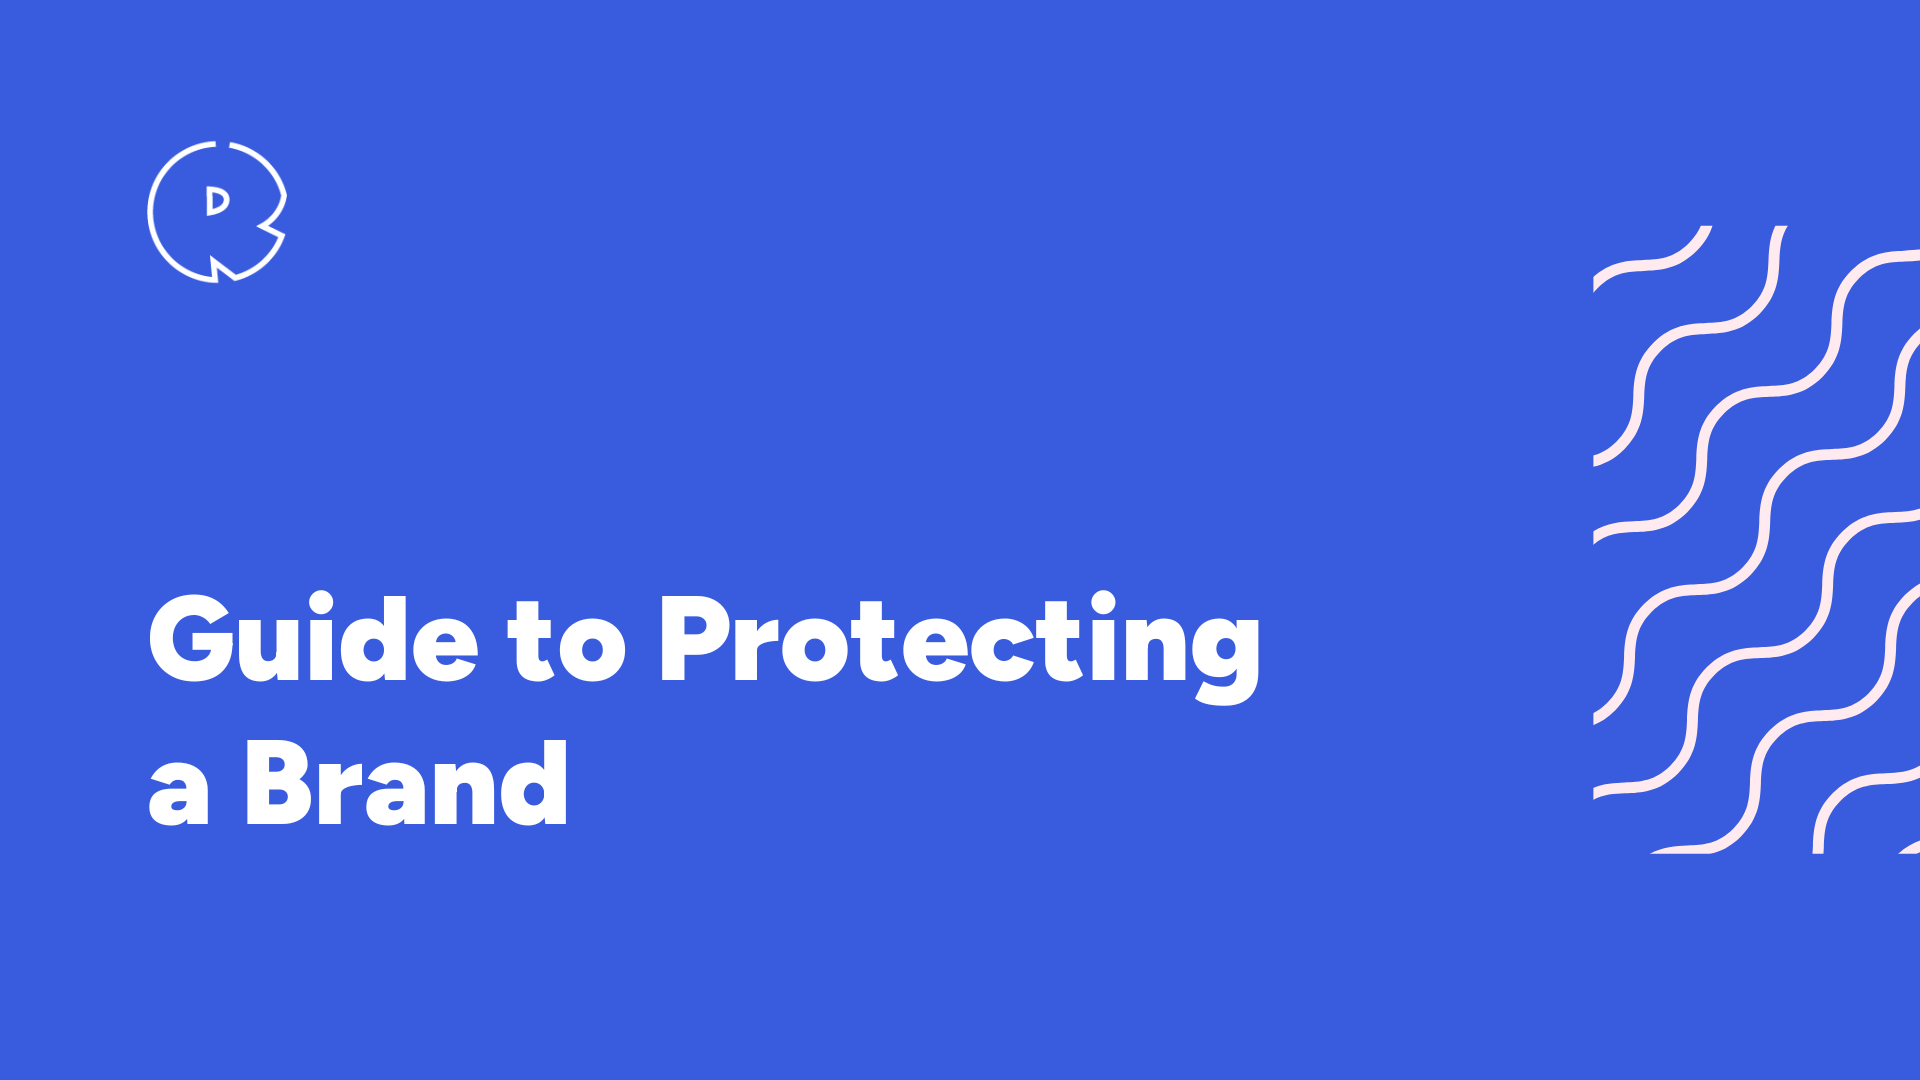 Guide to Protecting a Brand